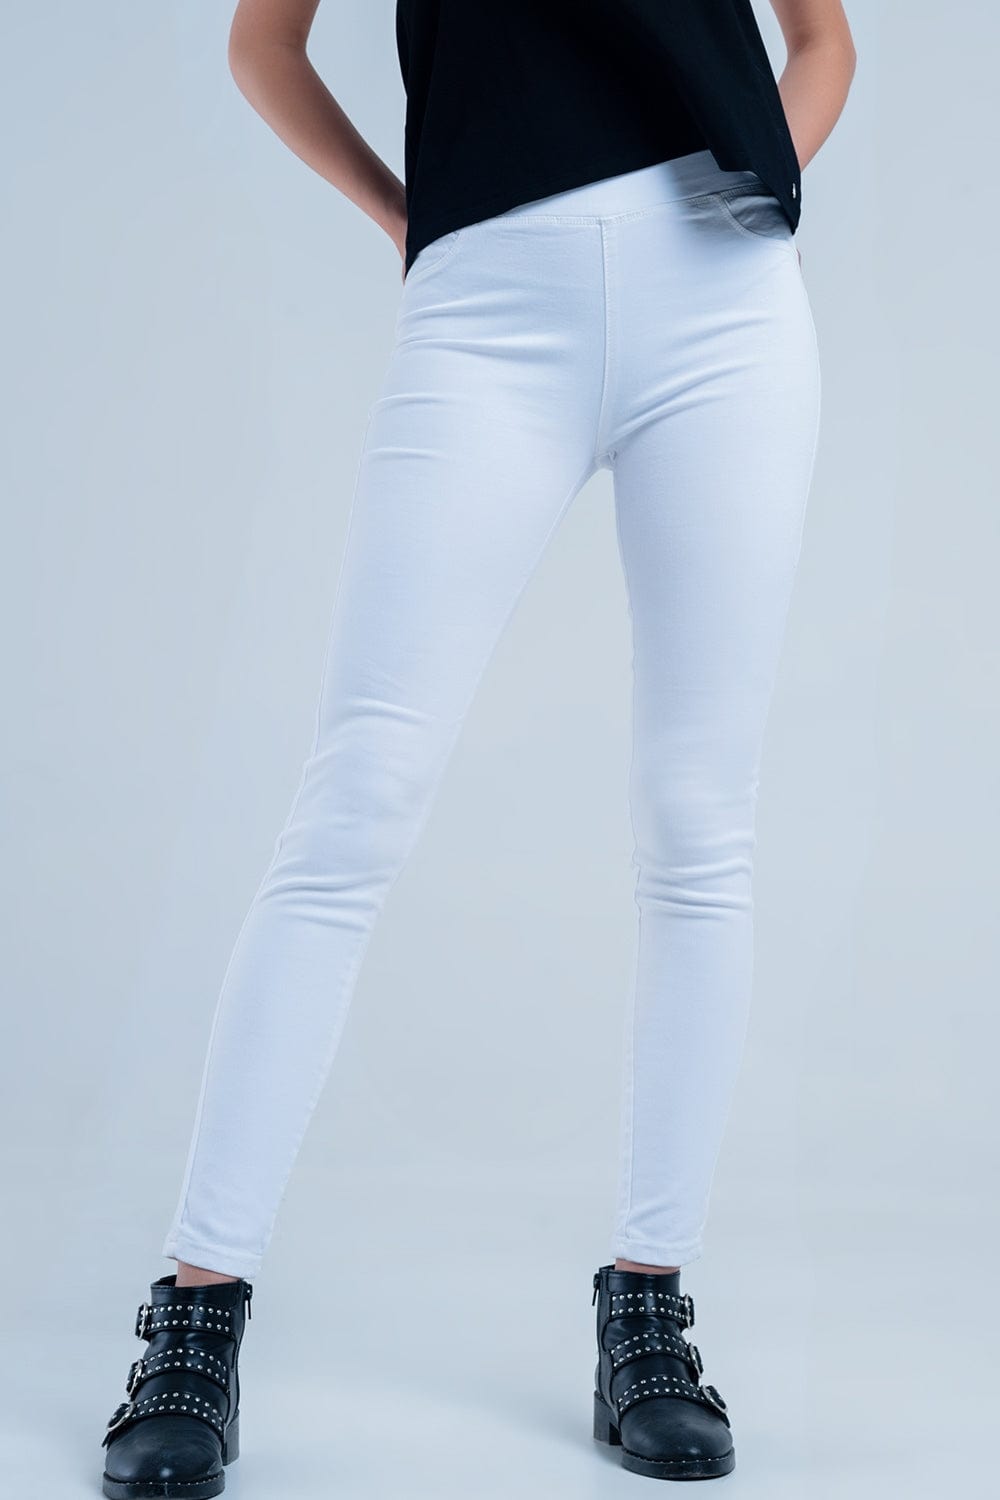 Q2 Women's Pants & Trousers White Jeggings with Back Pockets